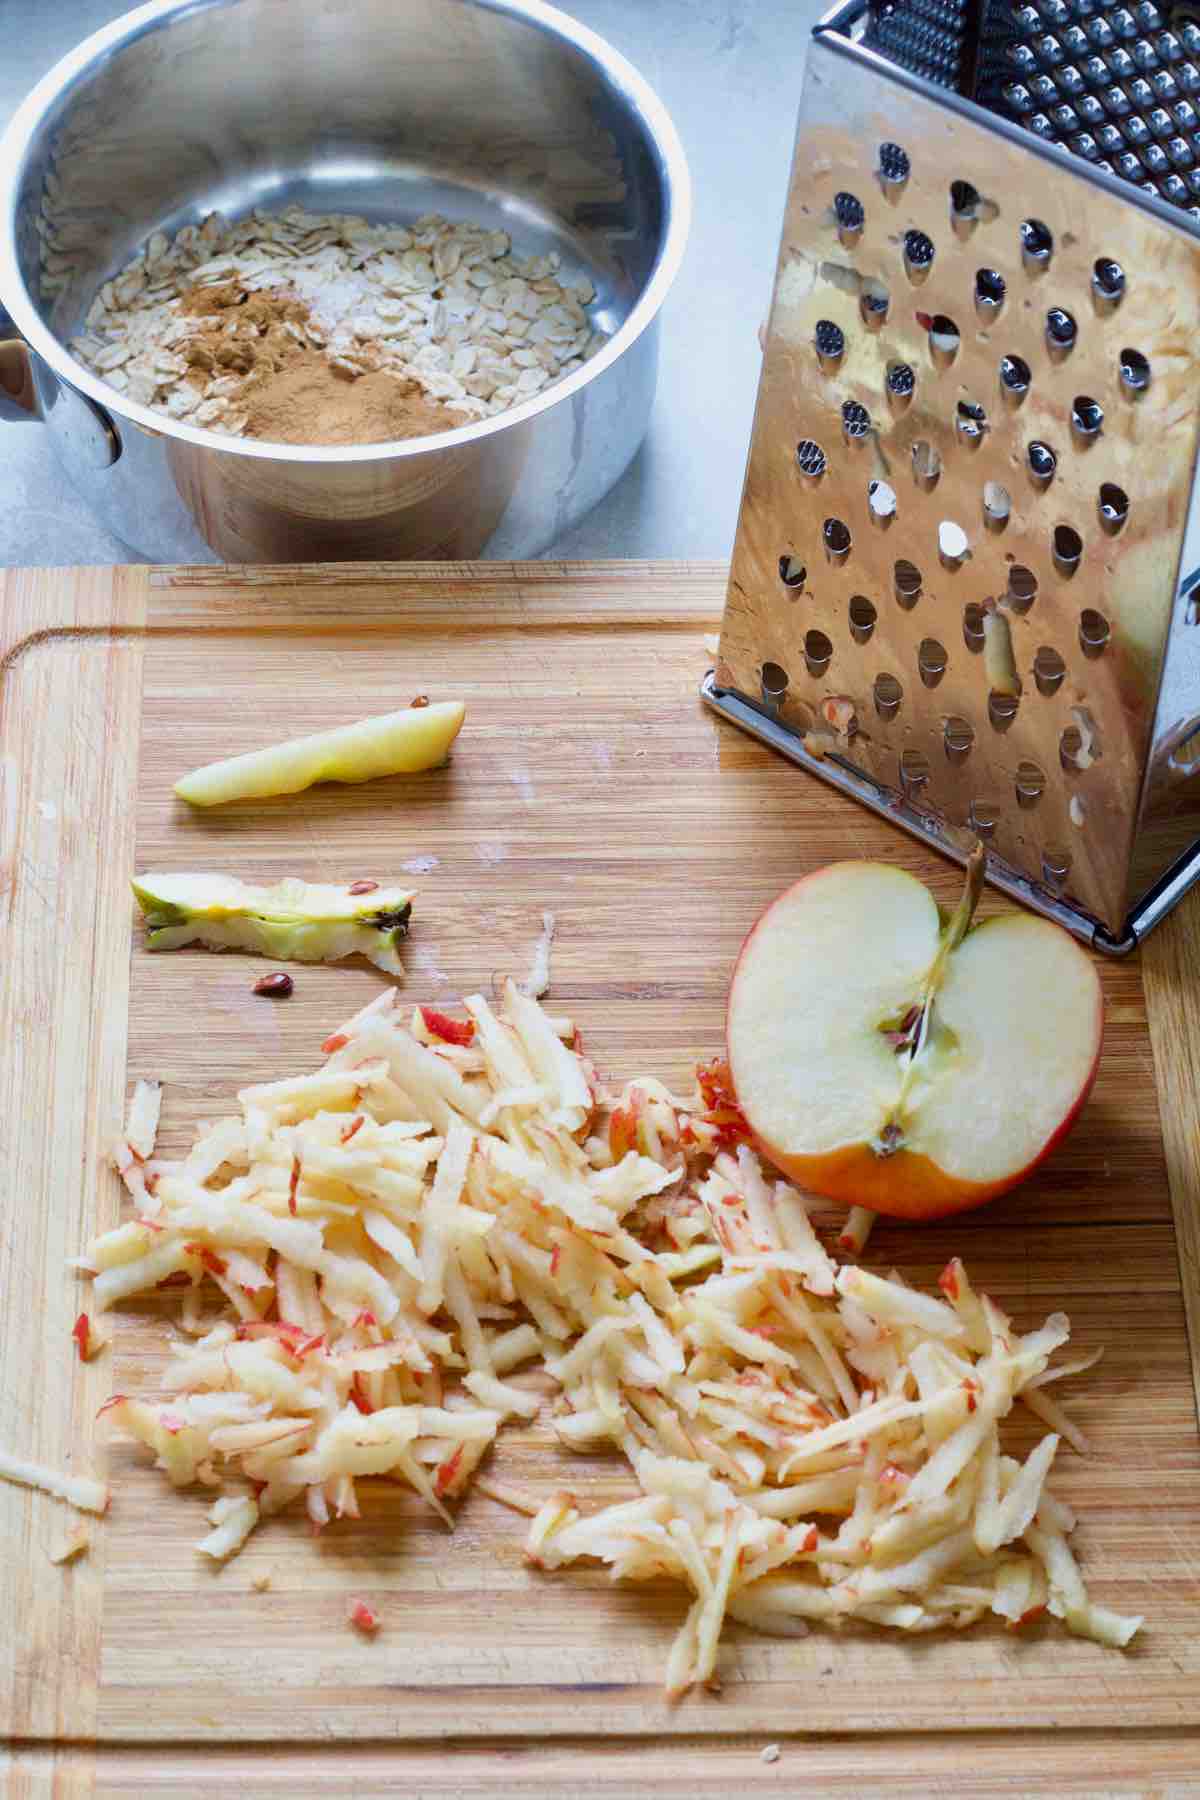 Grated apple on a board with box grater.